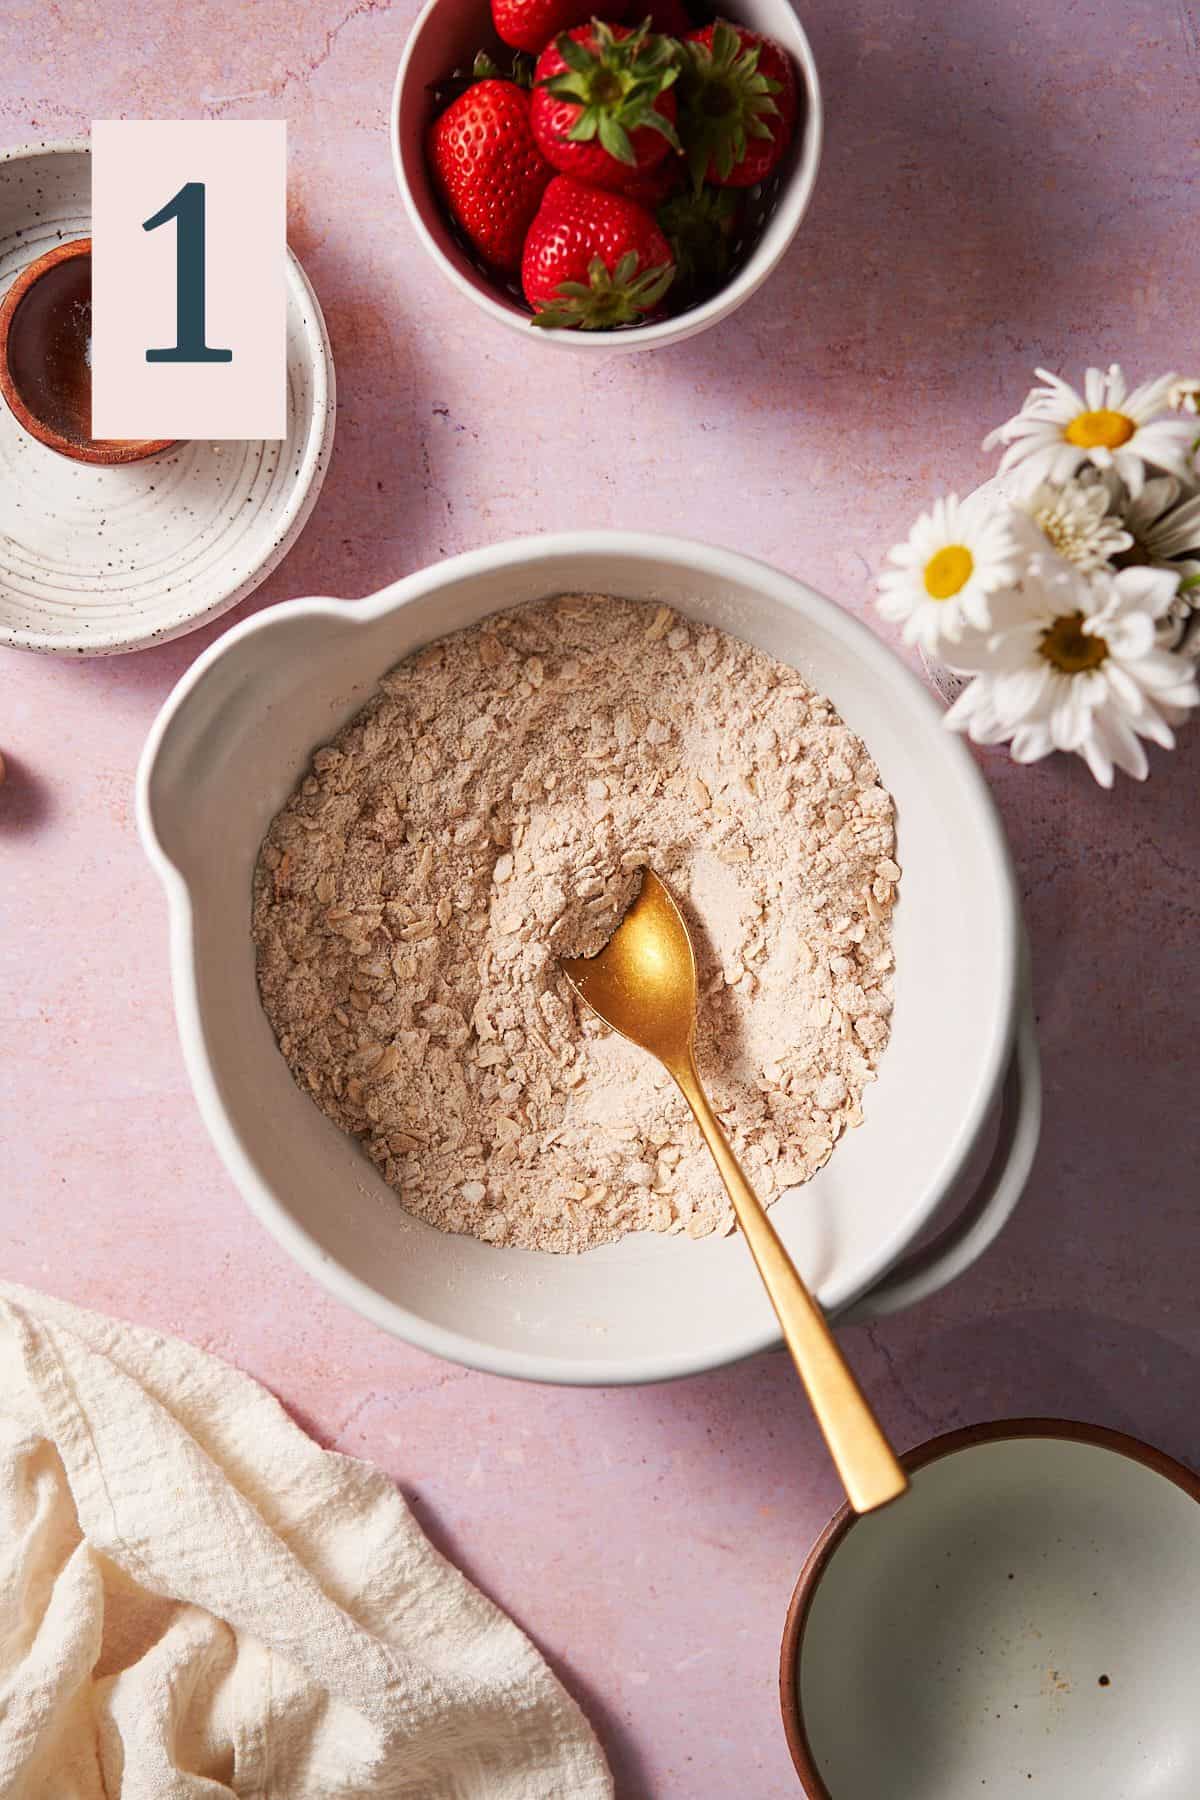 dry ingredients of flour, oats, cinnamon, sugar, and salt in a mixing bowl surrounded by flowers and strawberries. 